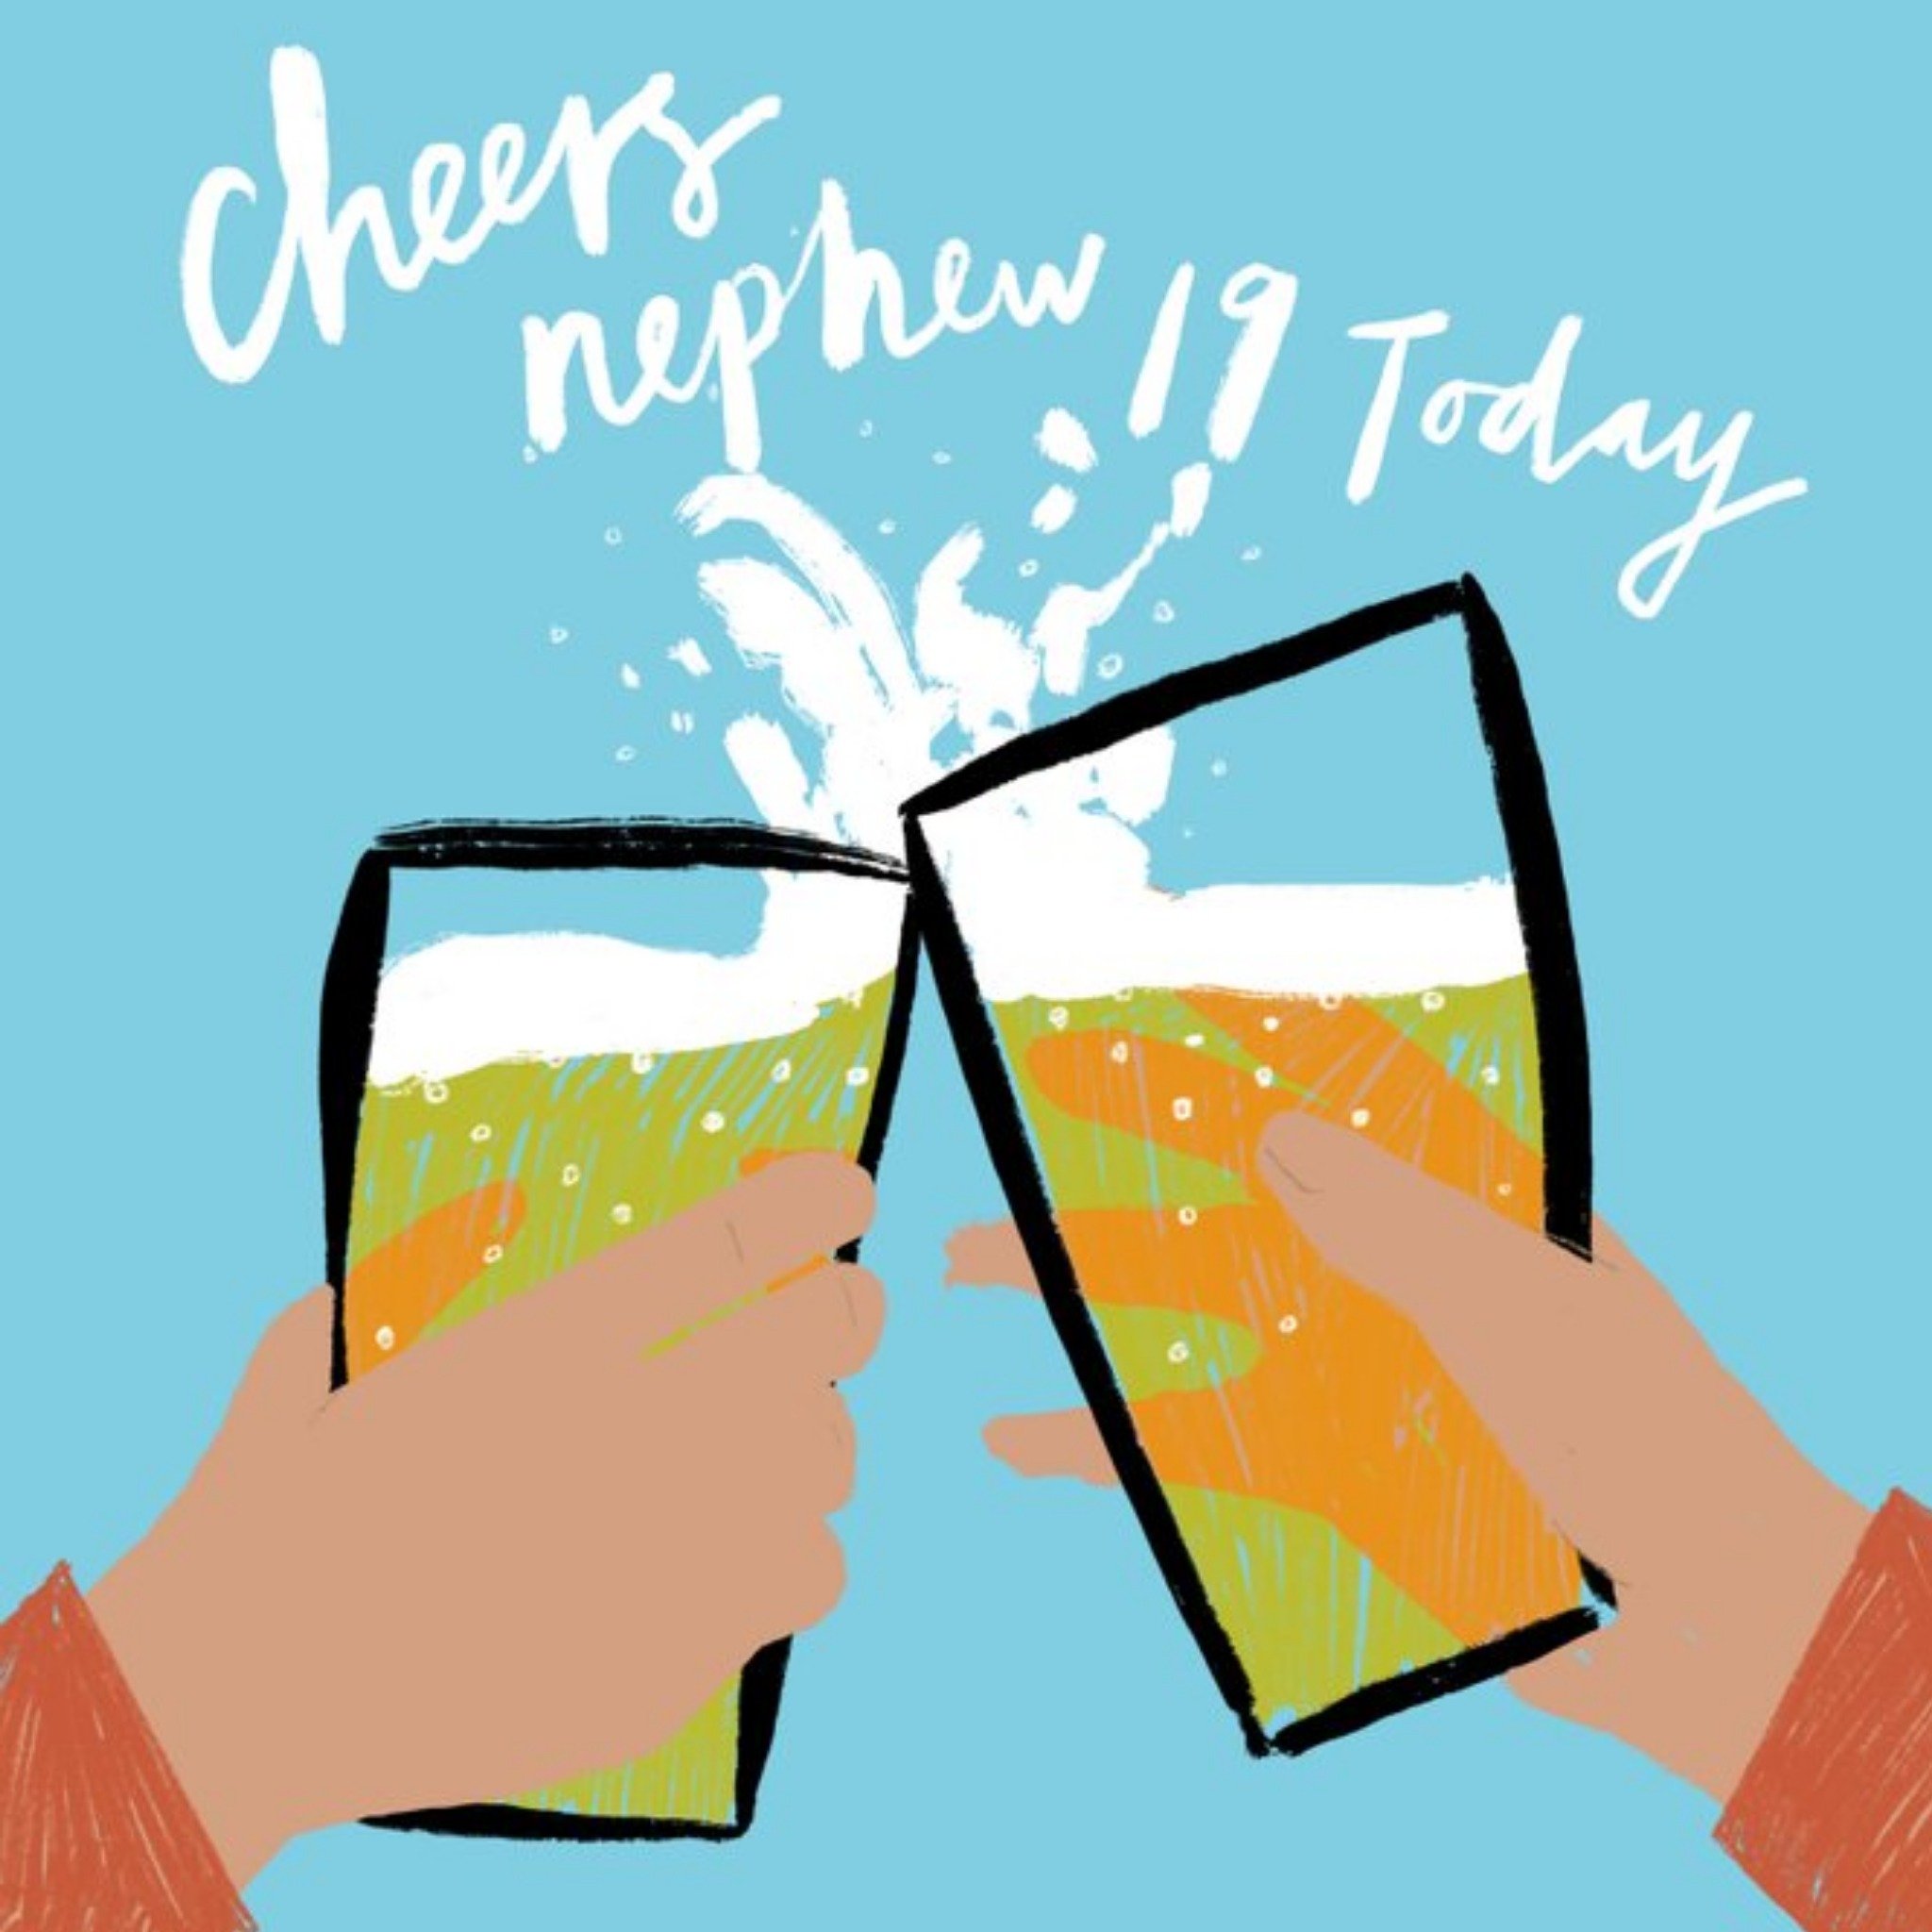 Moonpig Illustrated Cheers Nephew 19 Today Birthday Card, Square